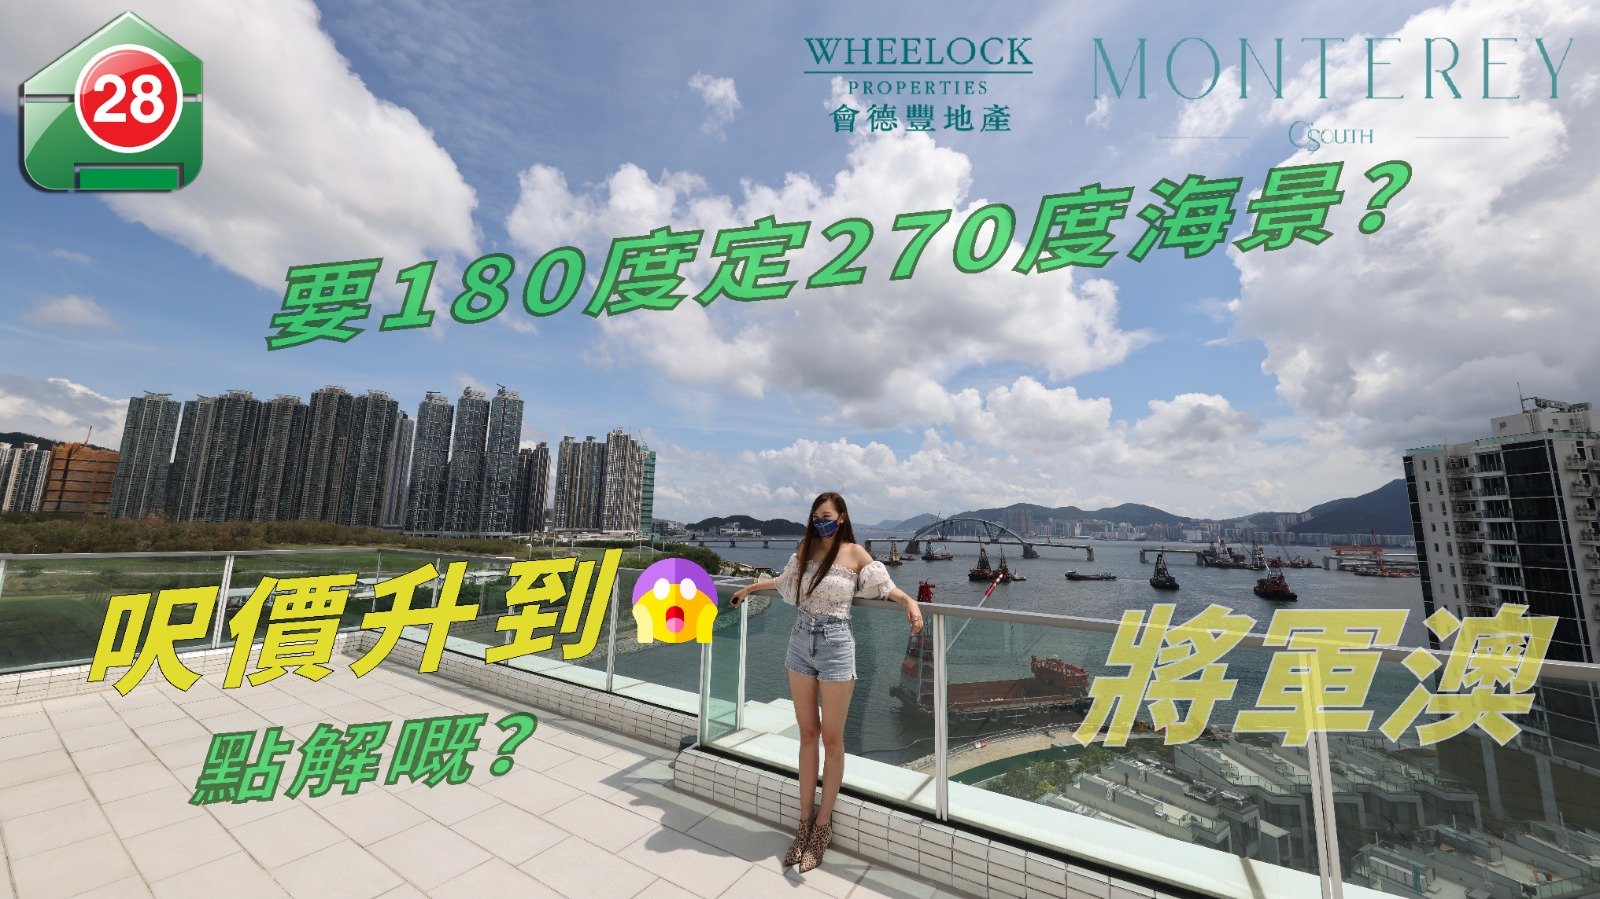 Monterey developer by Wheelock Properties Limited. It consist of 34 Tower(Tower 1, 2A, 2B, 3, 5, 6A, 6B, 7A, 7B, 8, 9A and 9B, House 1-3, House 5-12, House 15-17, House A-H). It provides 926 units.The area of unit is from 239 to 1,670 square feet and area of House is 1,843 to 2,004 square feet.